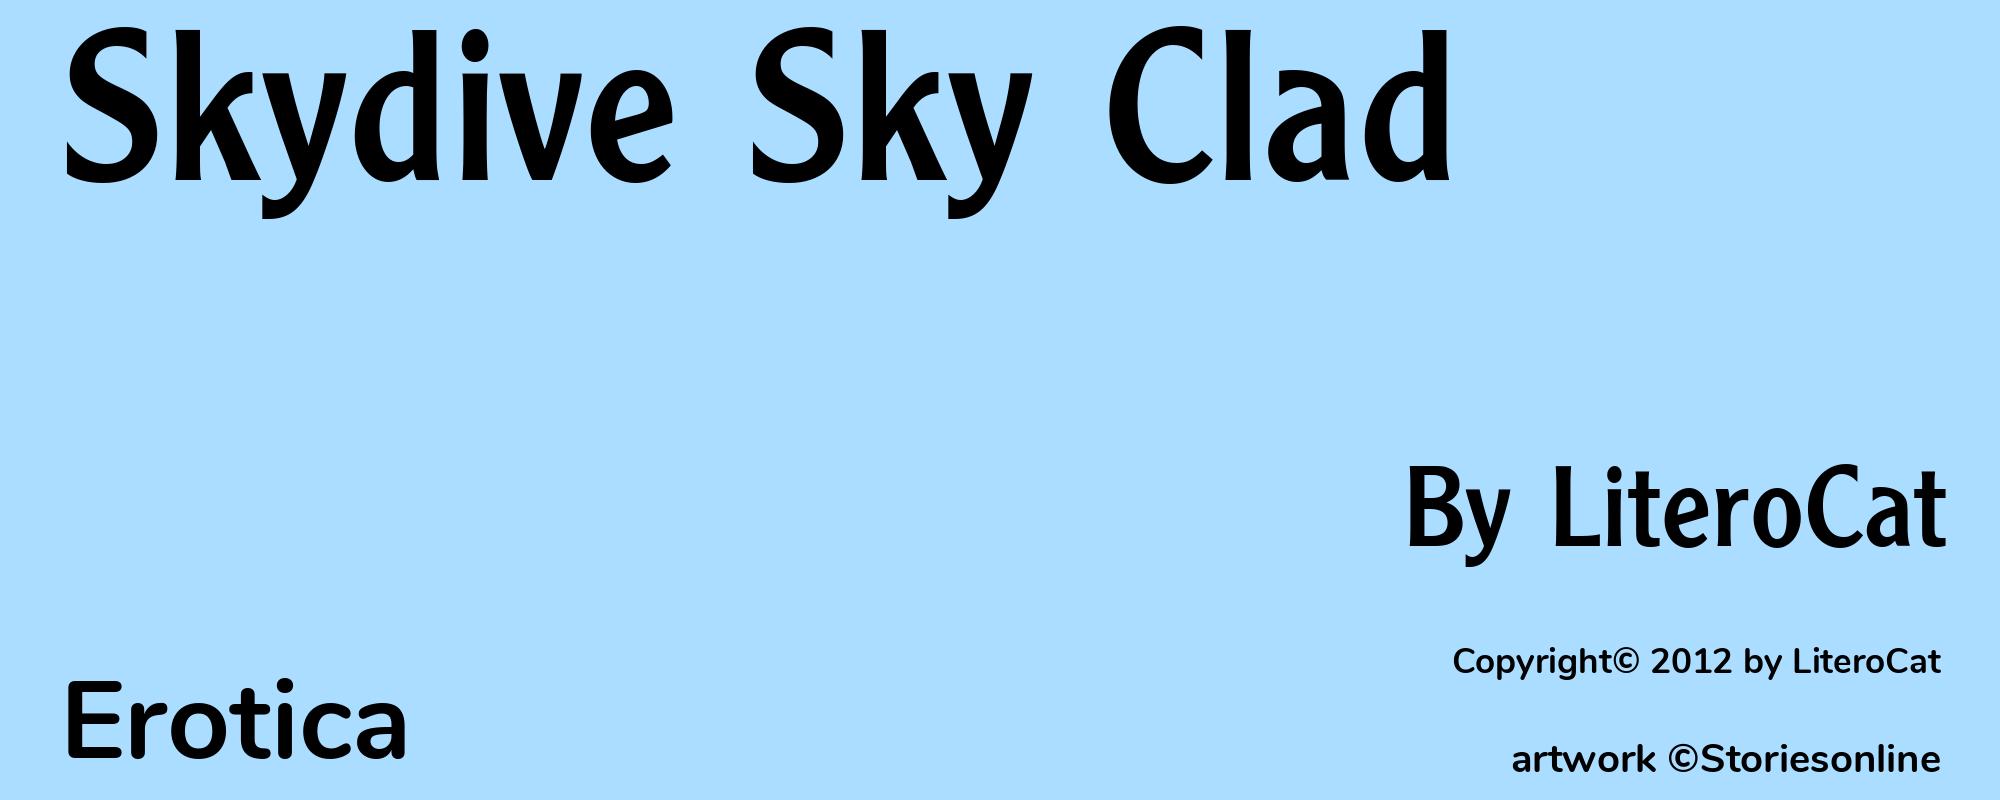 Skydive Sky Clad - Cover